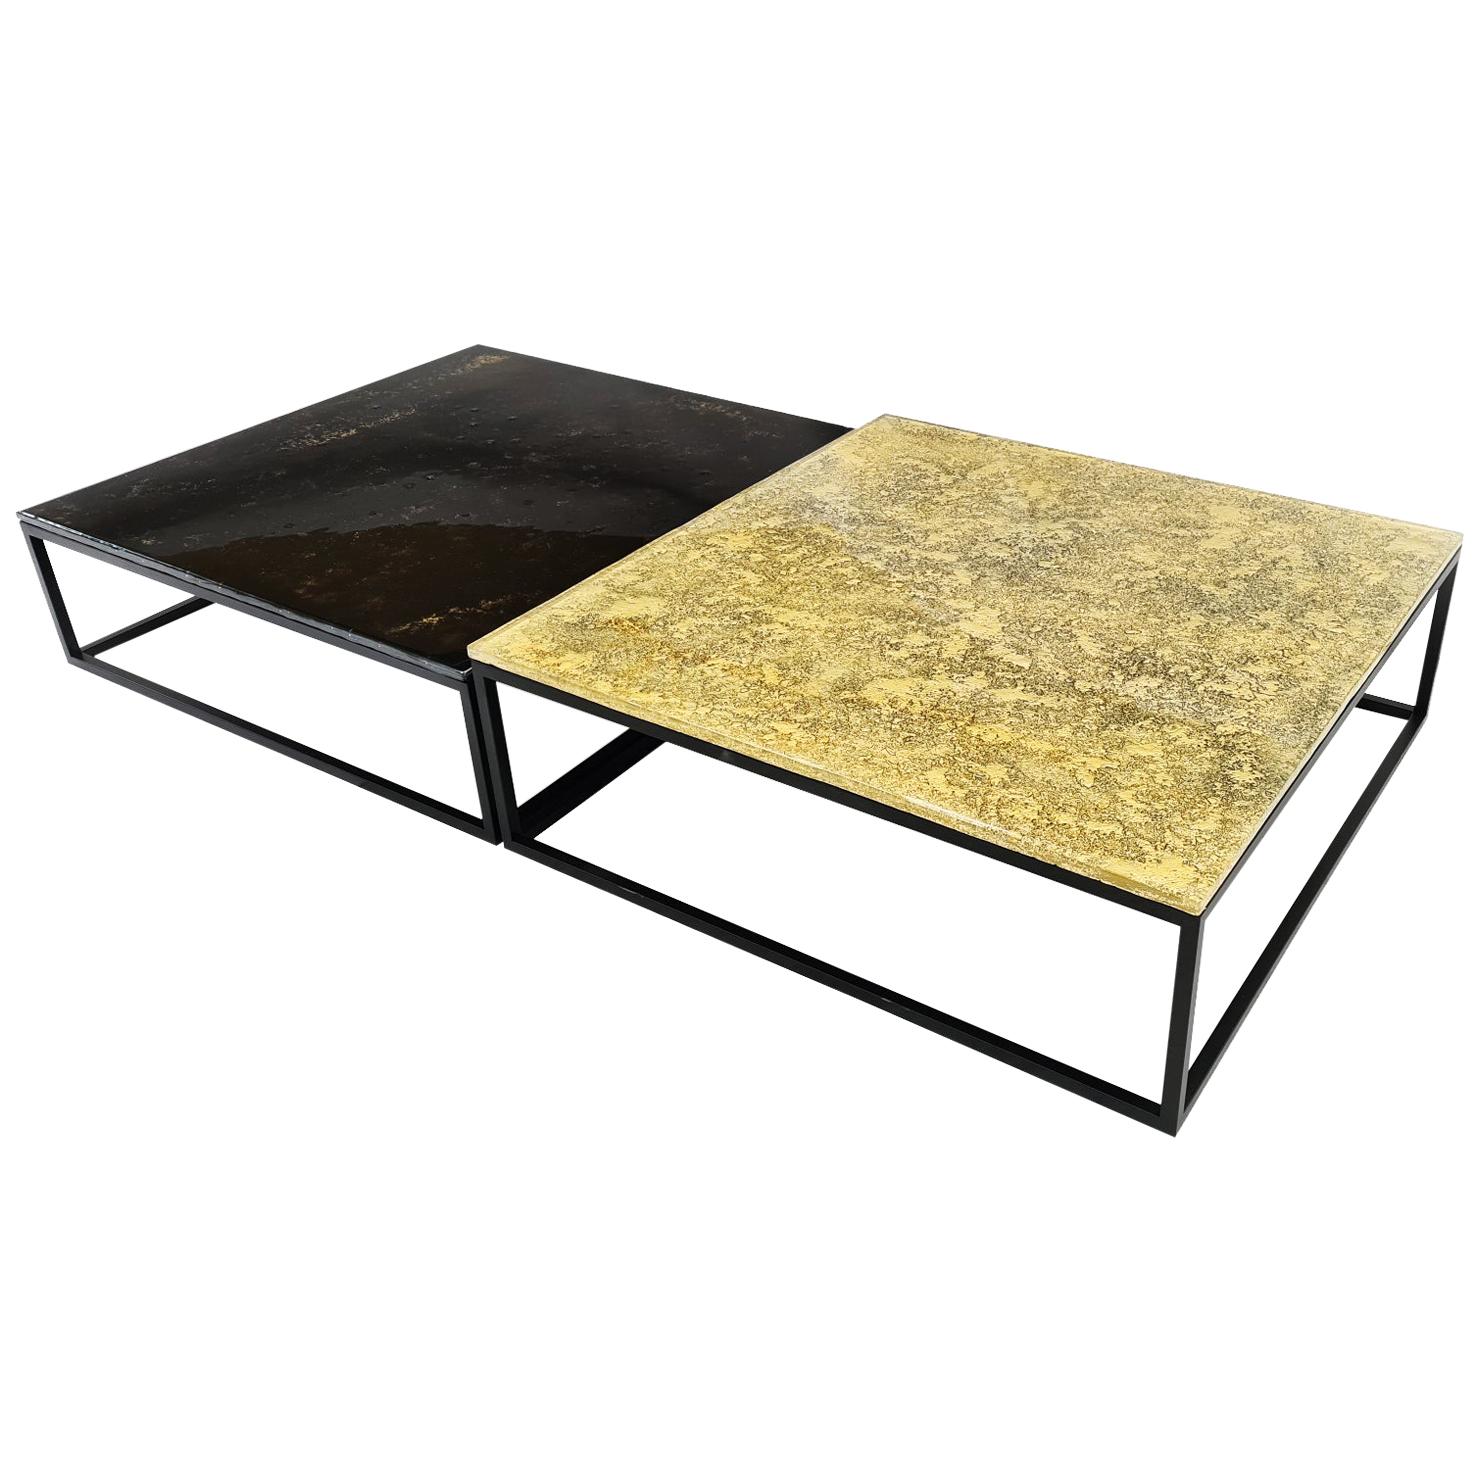 Modern Contemporary Square Coffee Tables Fusing Murano Glass in Gold, Black